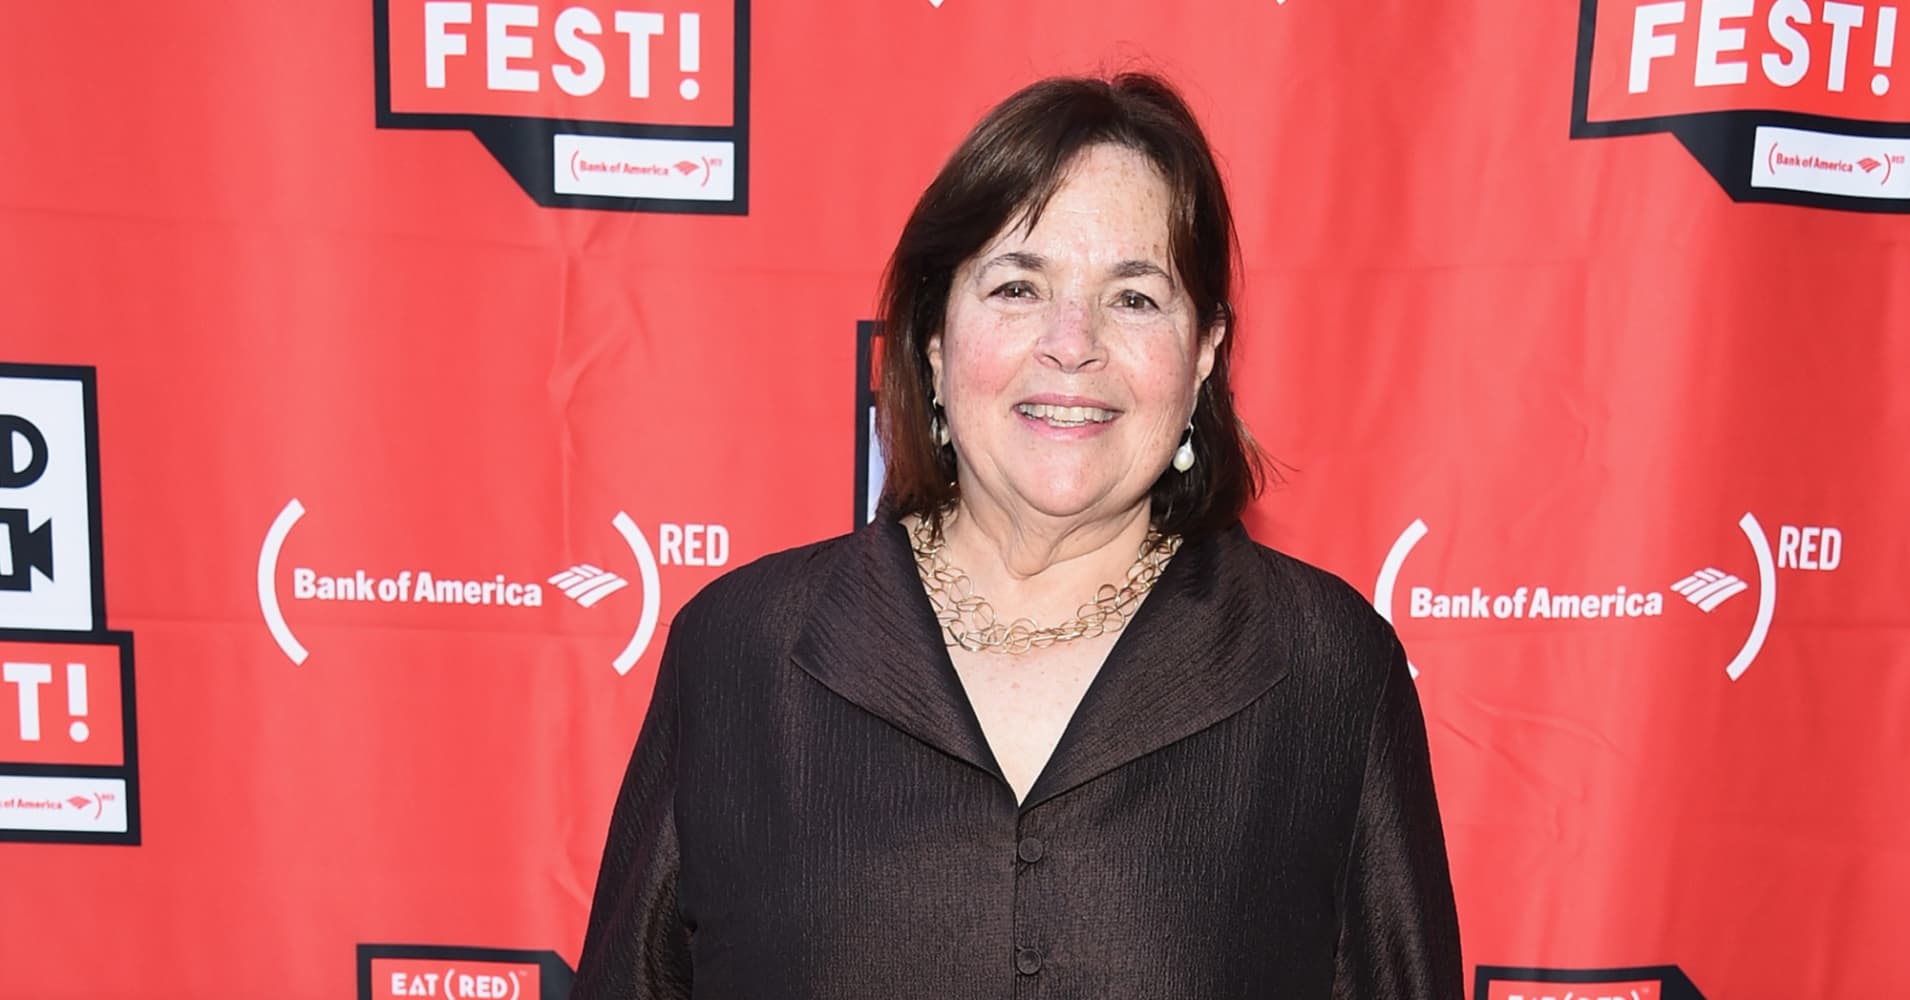 Ina Garten’s best advice for making a career change